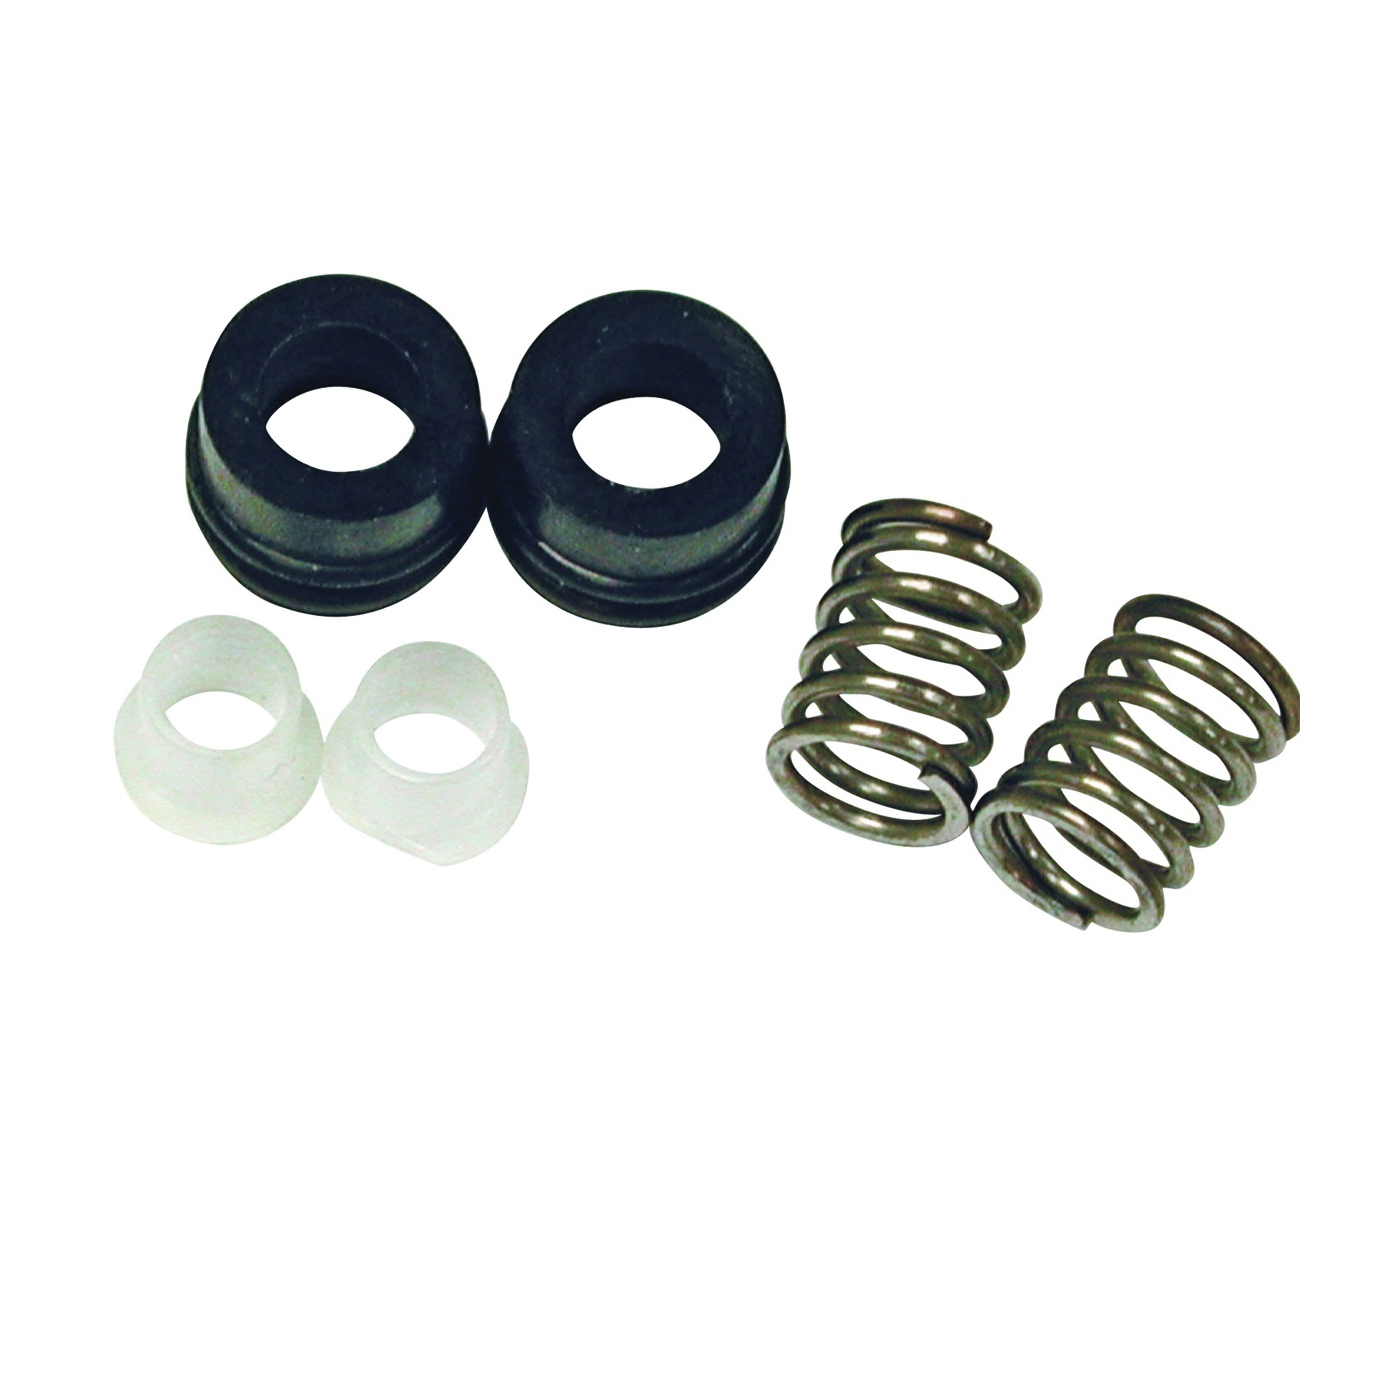 Danco 80686 Seat and Spring Kit, Plastic/Rubber/Stainless Steel, Black - 1